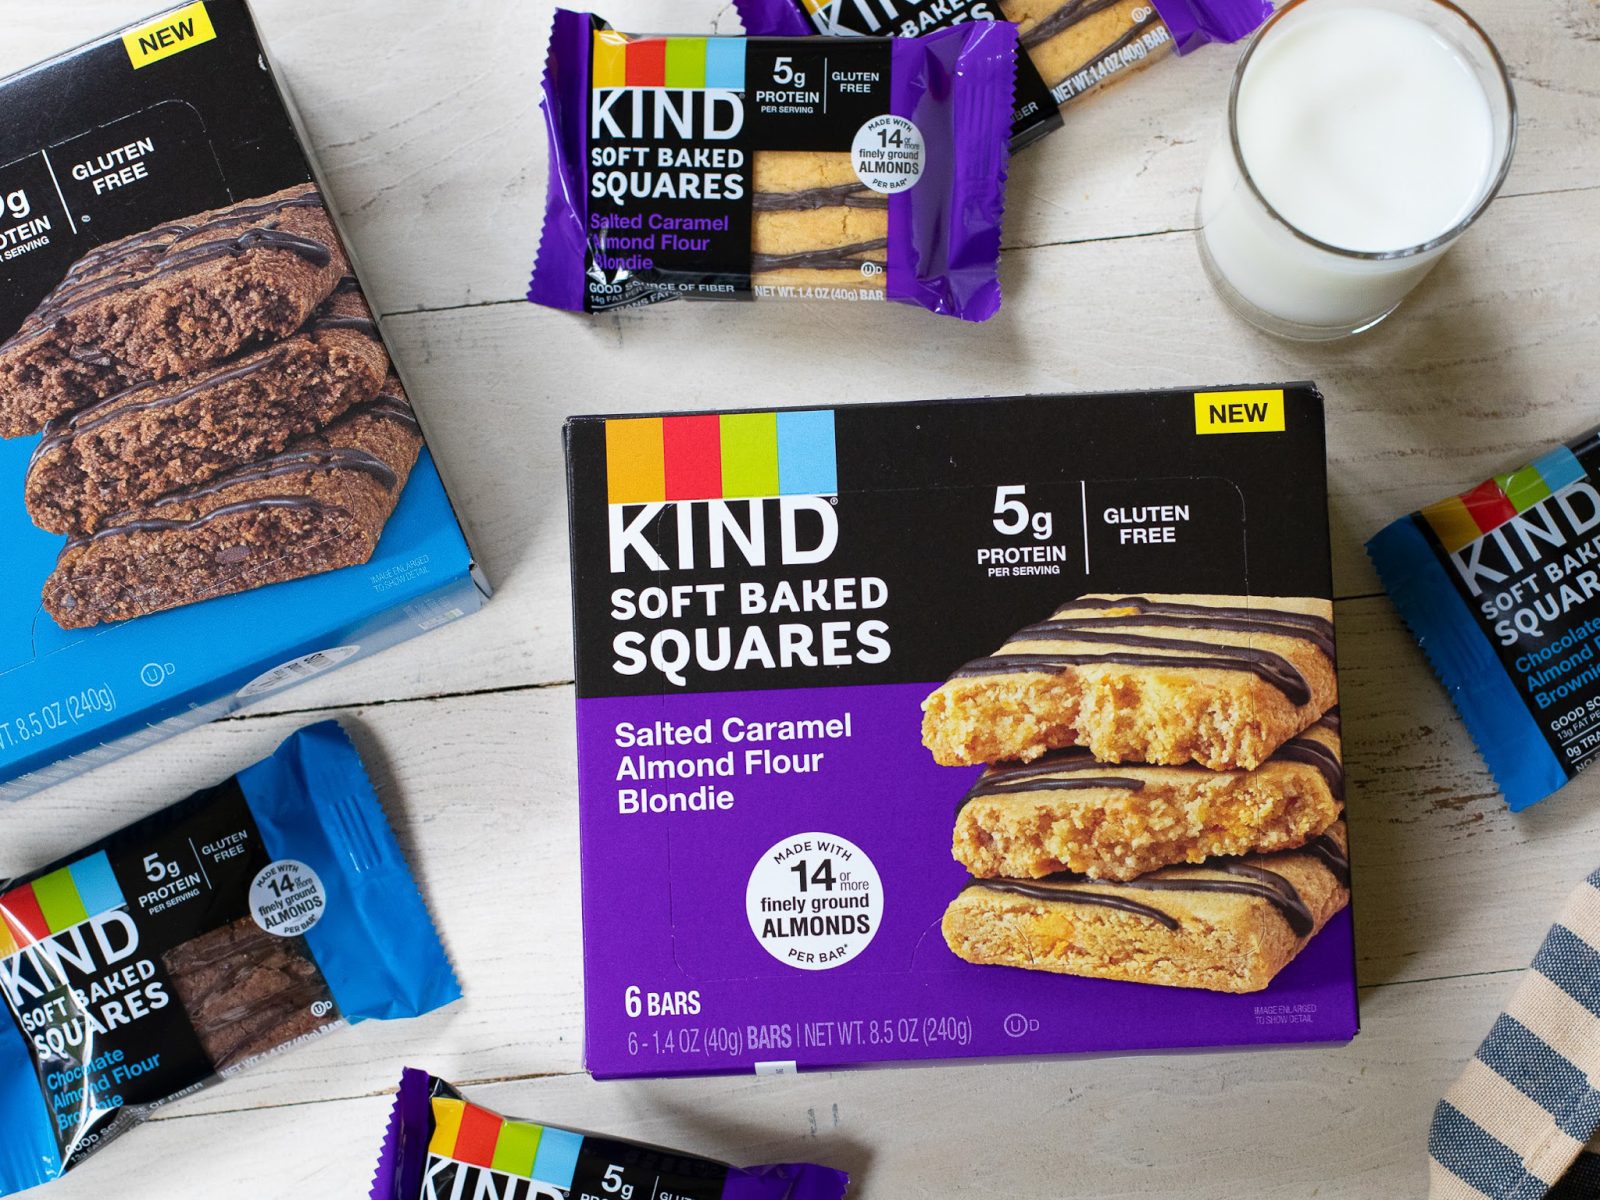 Try The New Kind Soft Baked Squares For Just $5.99 Per Box At Kroger (Regular Price $8.79)